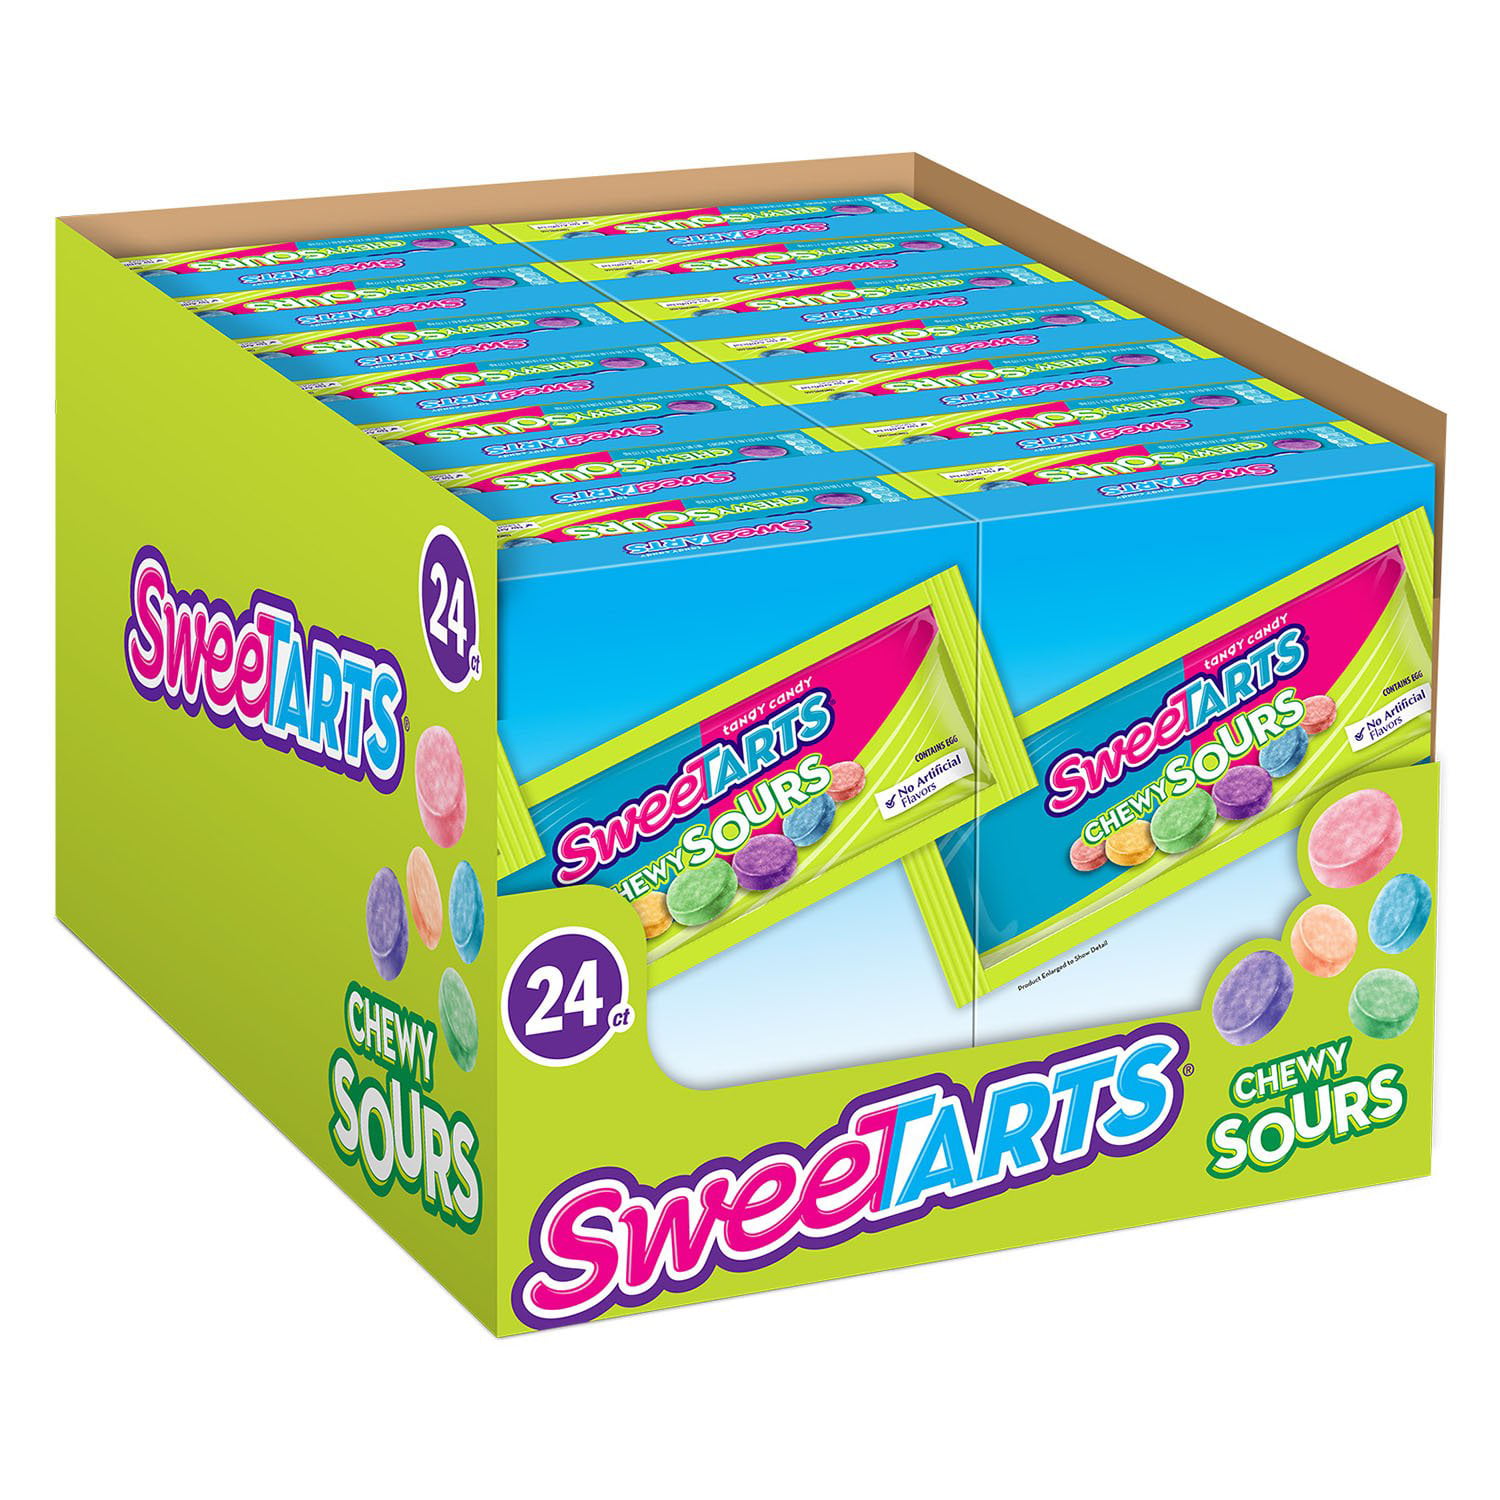 Wonka Shockers Sour Chewy Candy, 1.65 oz - Pay Less Super Markets